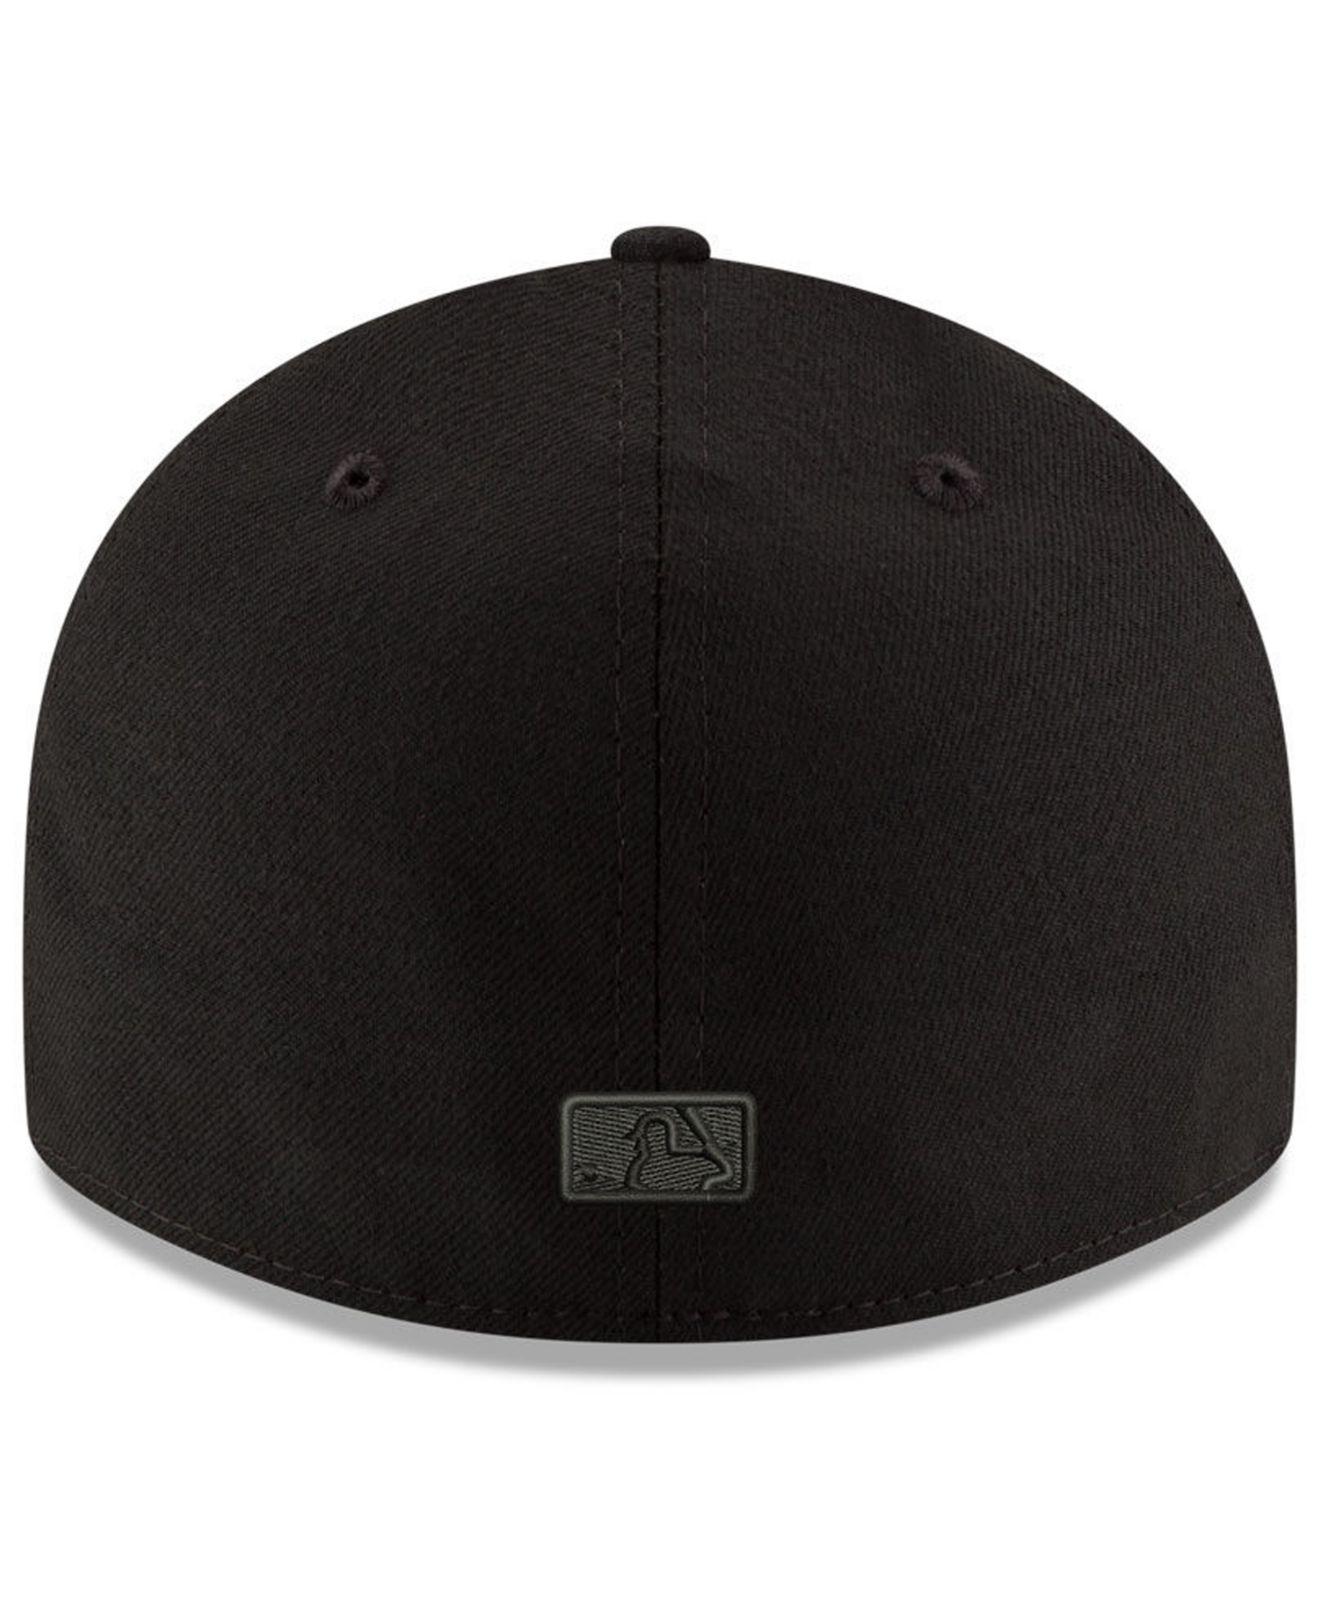 low profile 59fifty fitted hat